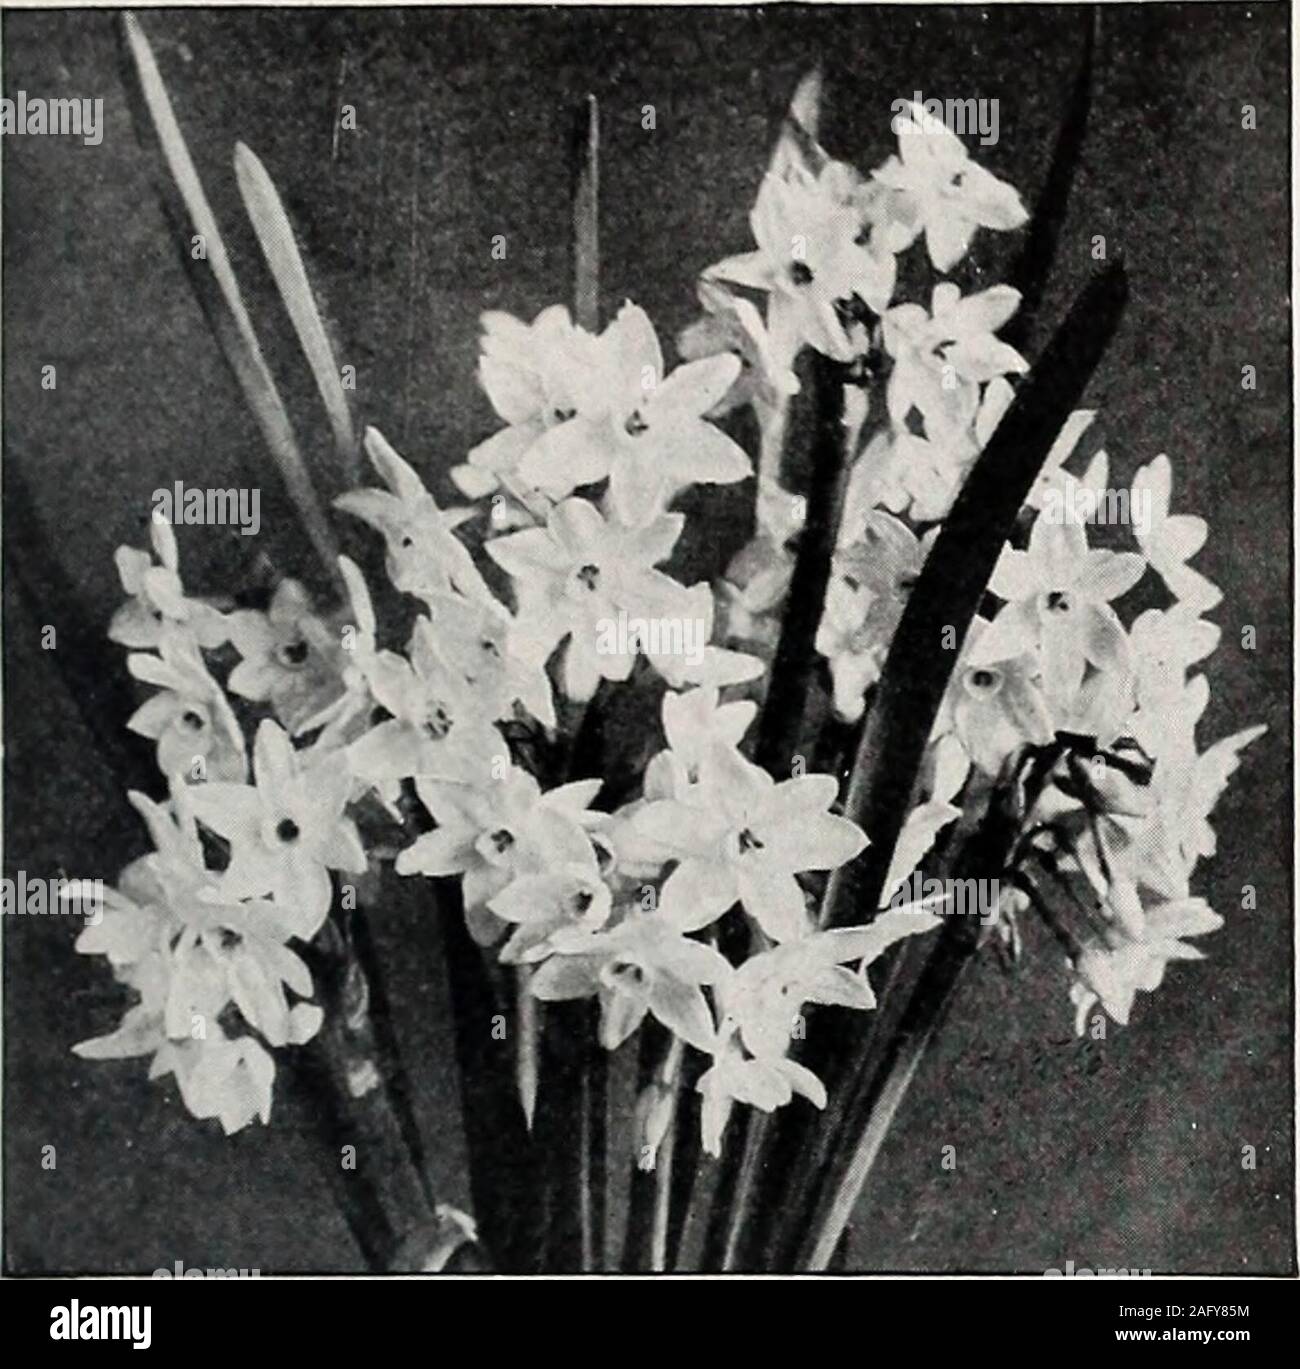 . Beckert's bulbs. Sir Watkin Narcissus BECKERTS ANNUAL AUTUMN CATALOGUE OF CHOICEST BULBS Double-Flowered Daffodils If to be sent by parcel post, add postage at your zone rate. Onedozen bulbs of Orange Phoenix, Sulphur Phoenix, and Double-CrownVon Sion weigh 3 pounds; 100 bulbs weigh 22 pounds; one dozenMammoth Von Sion bulbs weigh 4 pounds. ORANGE PHCENIX, or EGGS AND Each Doz. 100 1,000BACON. Sulphur-yellow, crimson center SO 06 SO 60 S4 70 $44 00 SULPHUR PHOINIX, or CODLINSAND CREAM. Double white, sulphur center 06 60 4 70 44 00 THE DOUBLE VON SION, orGOLDEN YELLOW DAFFODIL. Fine lor the g Stock Photo